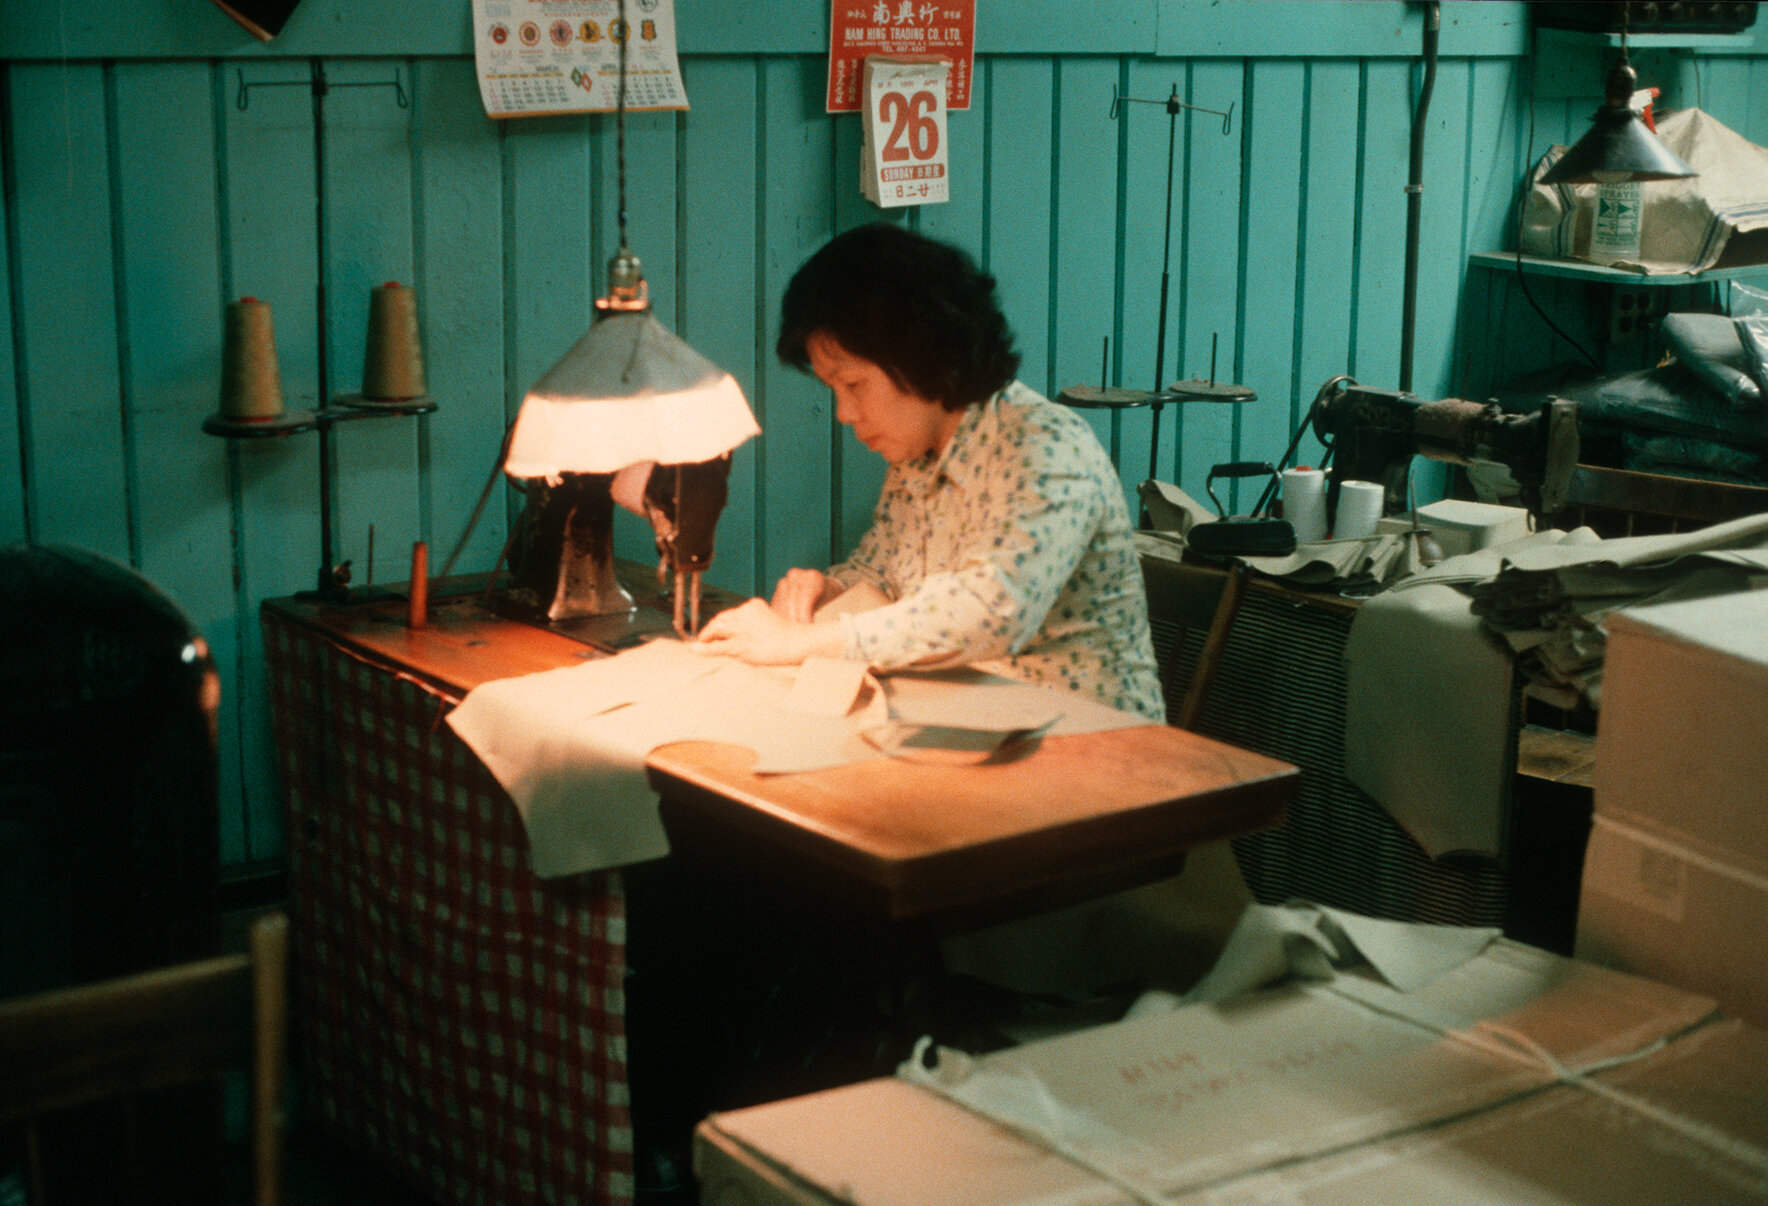  Seamstress working at Wing Hing Dry Goods, 1981 City of Vancouver Archives: AM1523-S6-F72-: 2008-010.0494, photographer Paul Yee 